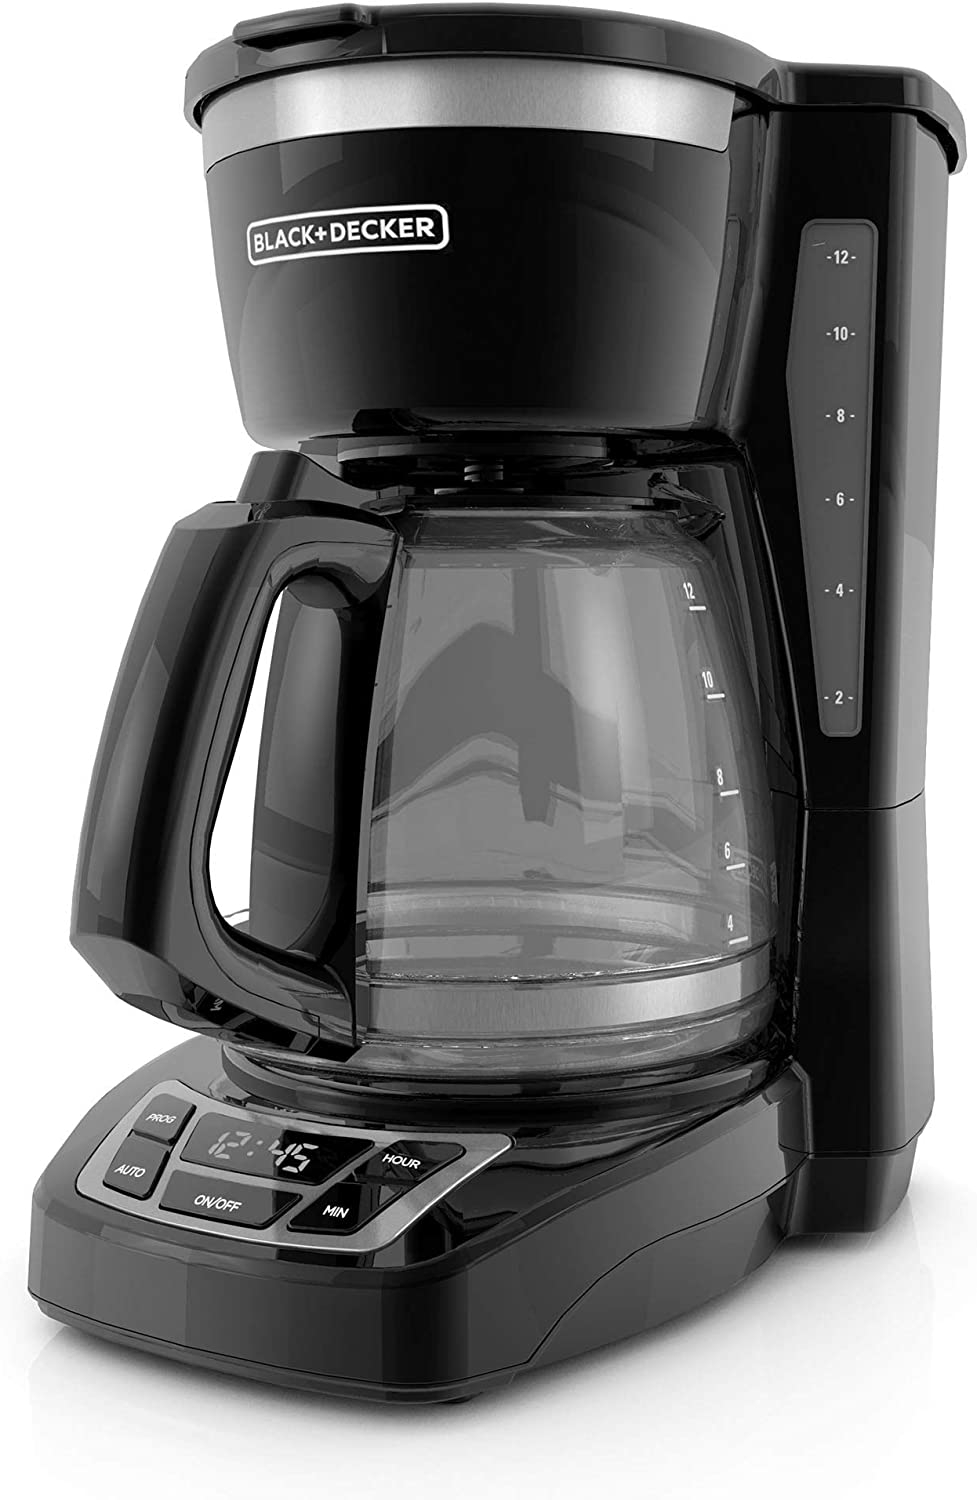 Black+Decker CM1160B 12-Cup Programmable Coffee Maker, Black/Stainless Steel Import To Shop ×Product customization General